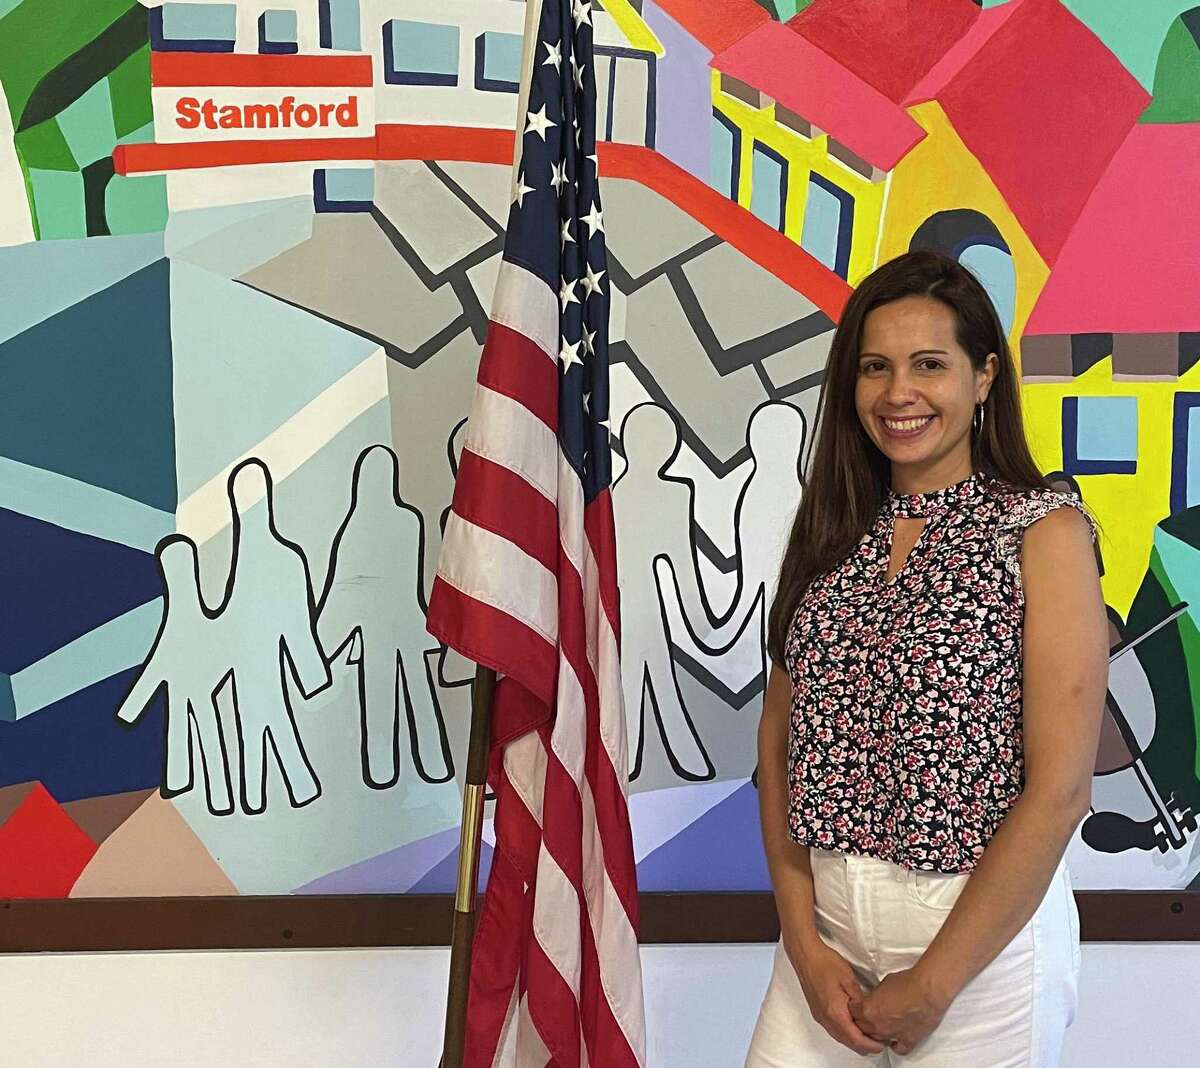 Alejandra Gomez, who works for Building One Community/The Center for Immigrant Opportunity in Stamford, is celebrating her first Fourth of July as a U.S. citizen.